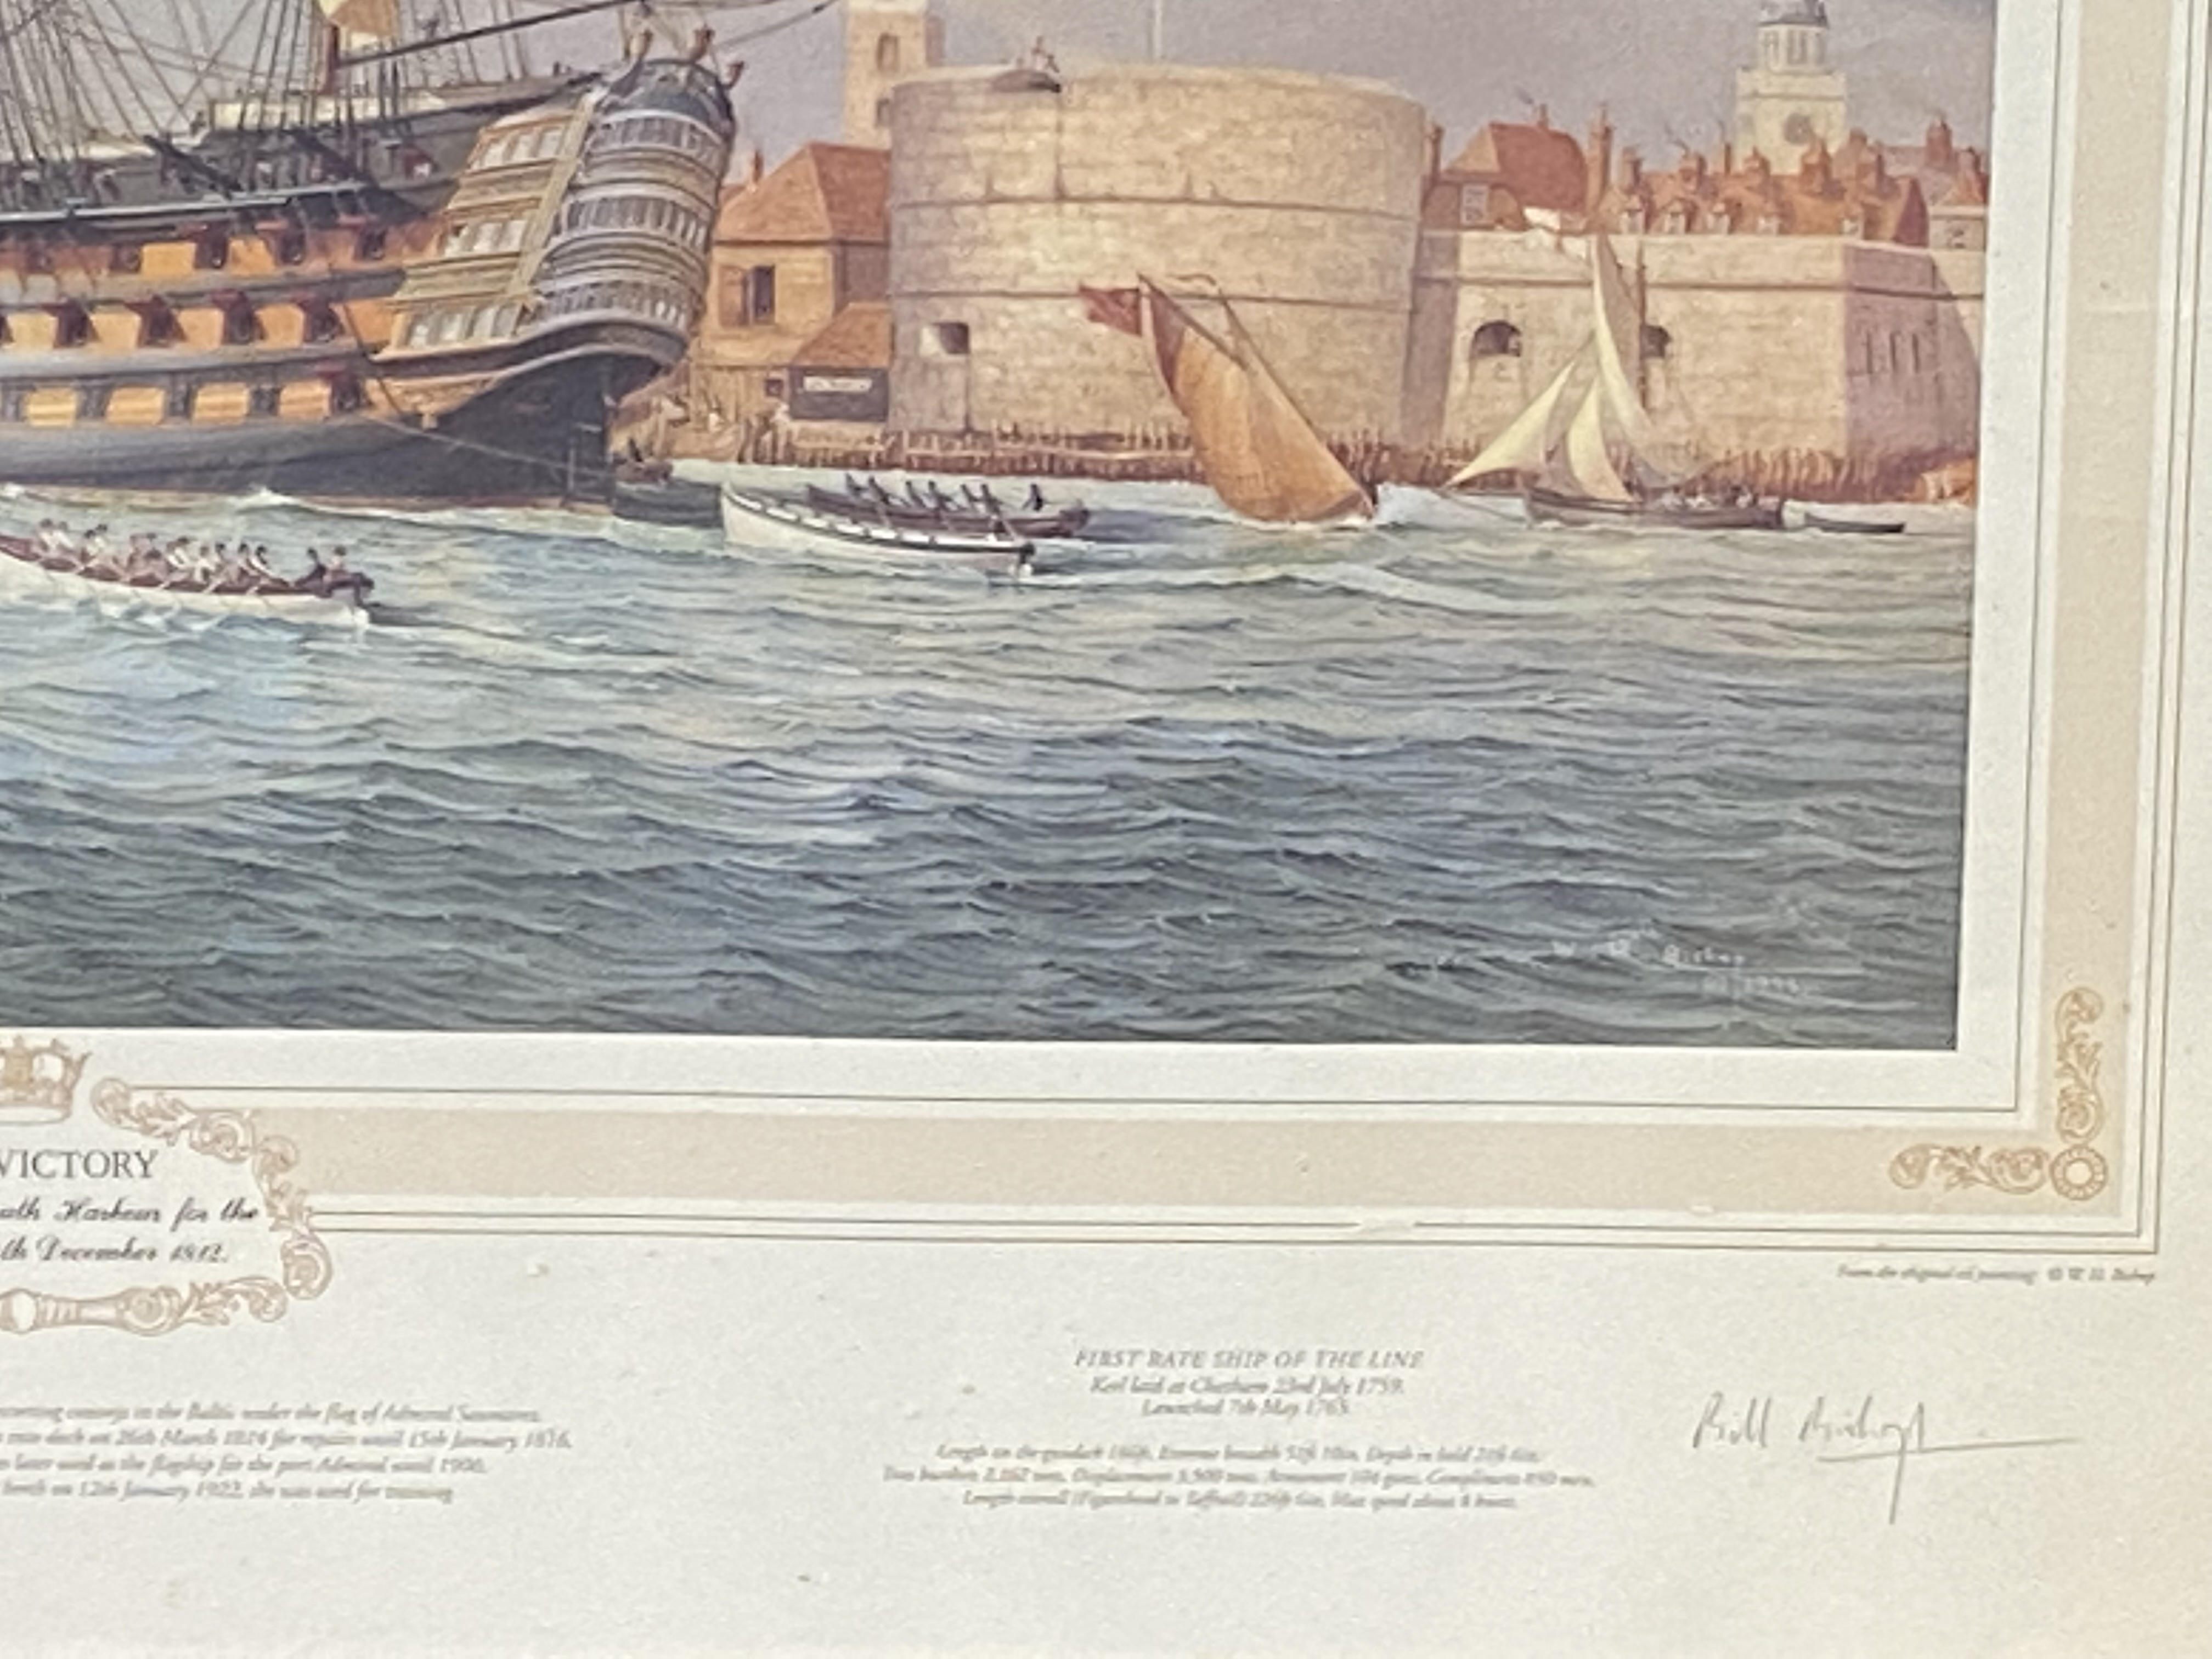 Framed and glazed print of HMS Victory - Image 5 of 5